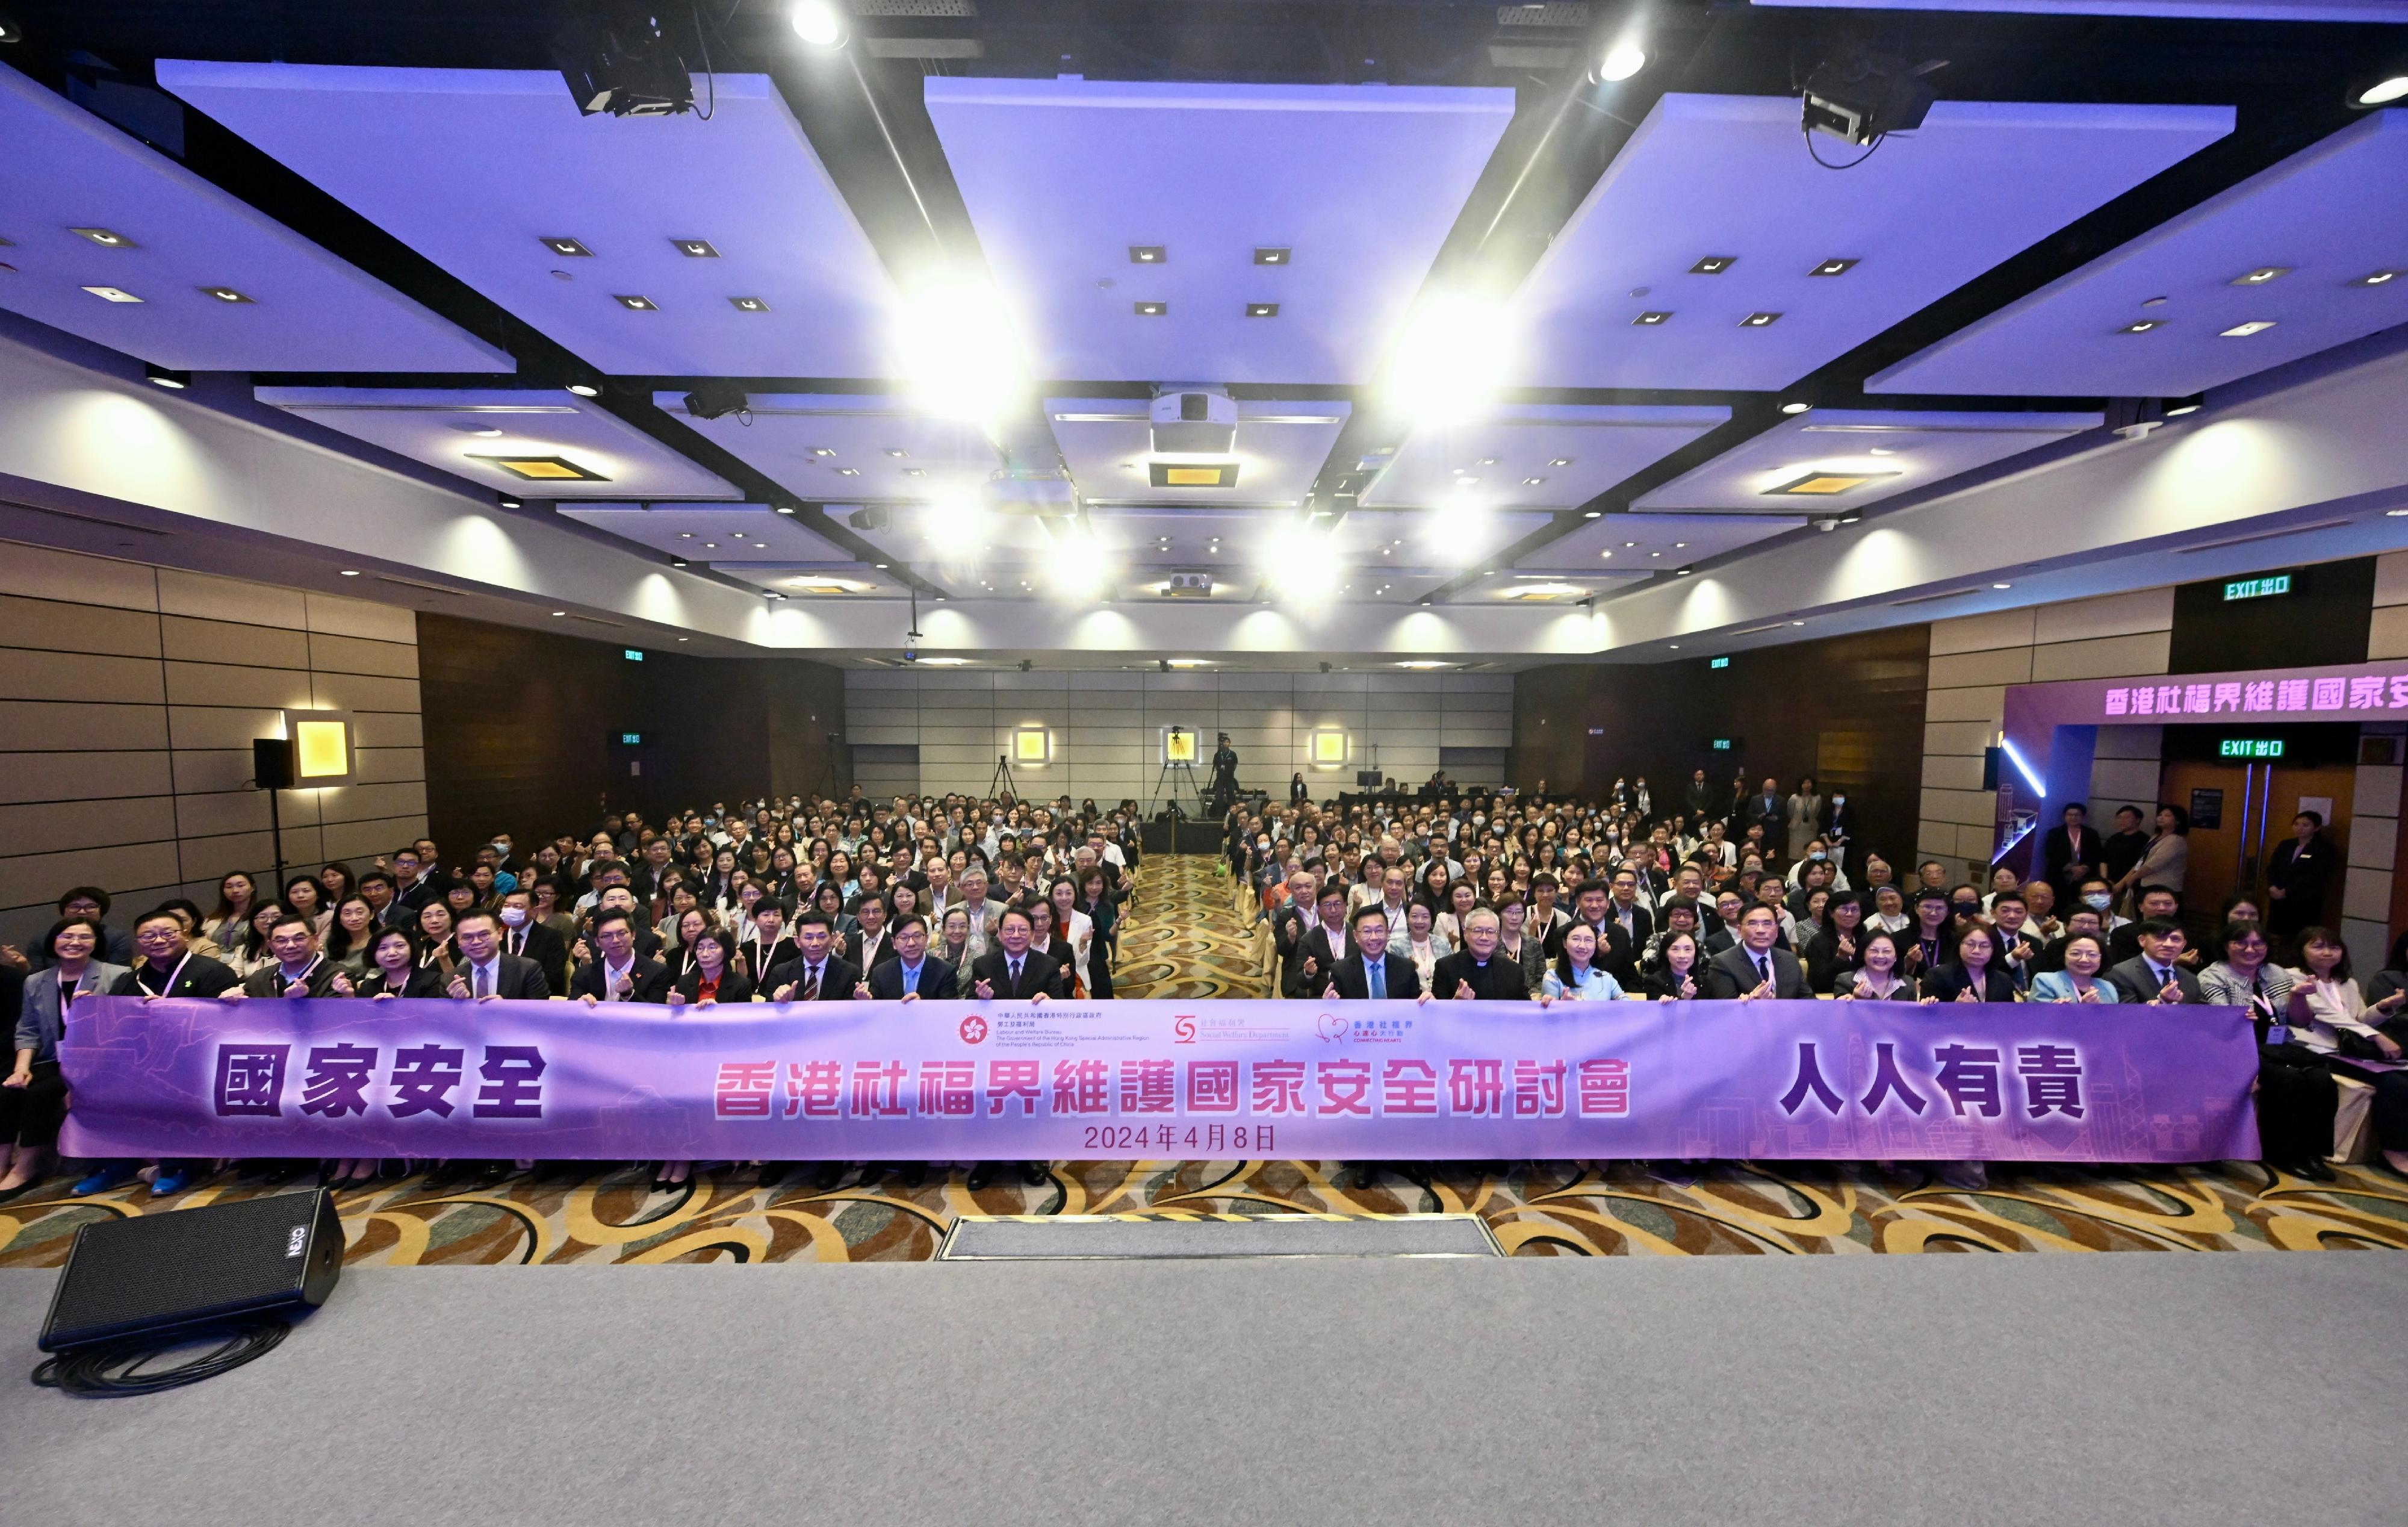 The symposium on safeguarding national security for the social welfare sector of Hong Kong, jointly organised by the Labour and Welfare Bureau and the Social Welfare Department of the Government of the Hong Kong Special Administrative Region and the Connecting Hearts Limited, was held today (April 8). Photo shows guests and participants at the symposium.